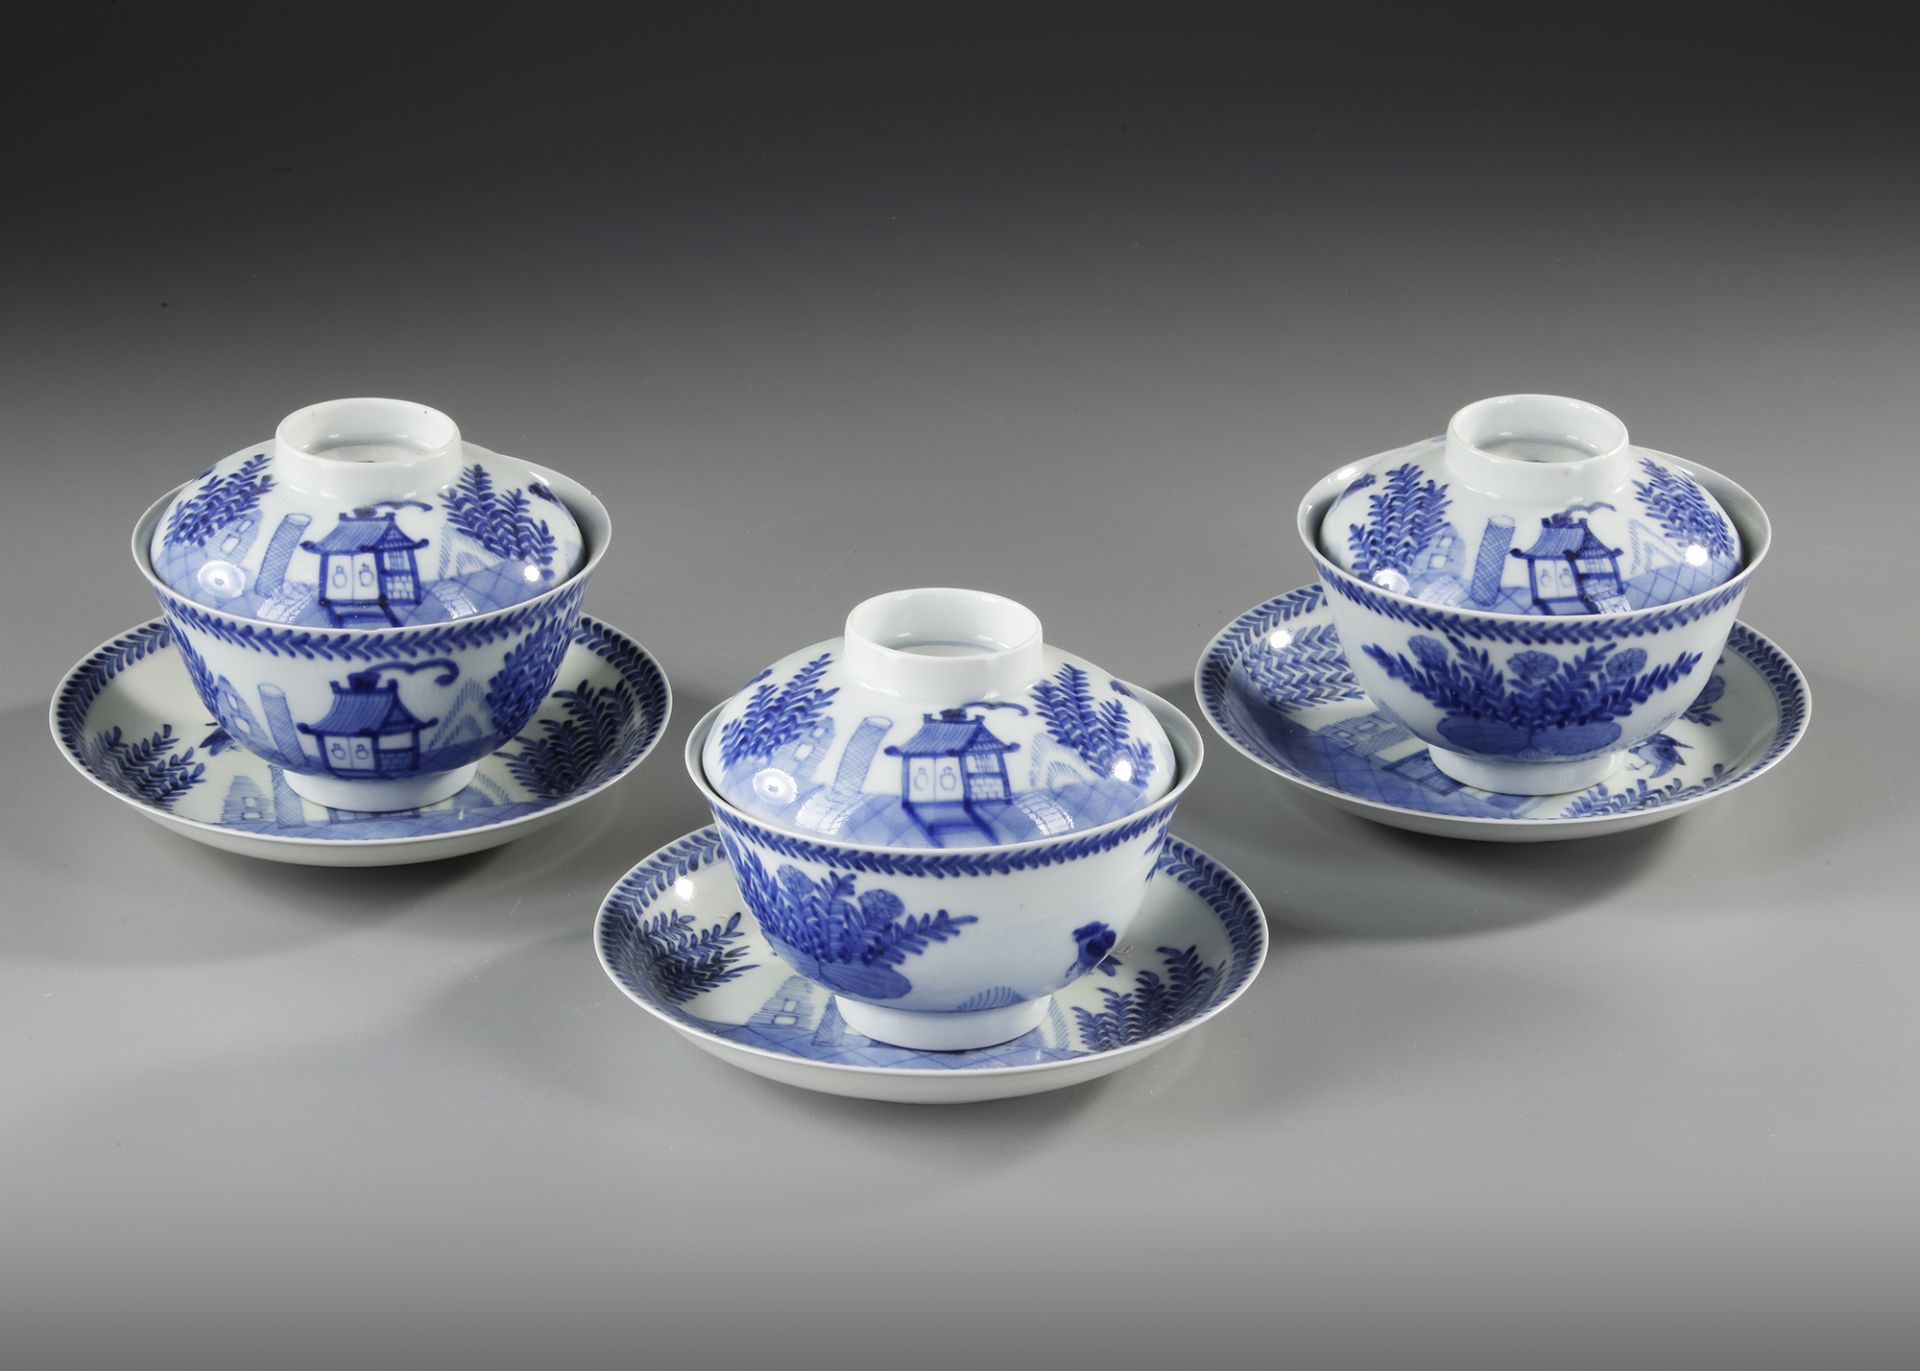 THREE CHINESE BLUE AND WHITE 'CUCKOO IN THE HOUSE' BOWL, COVERS AND SAUCERS, 18TH-19TH CENTURY